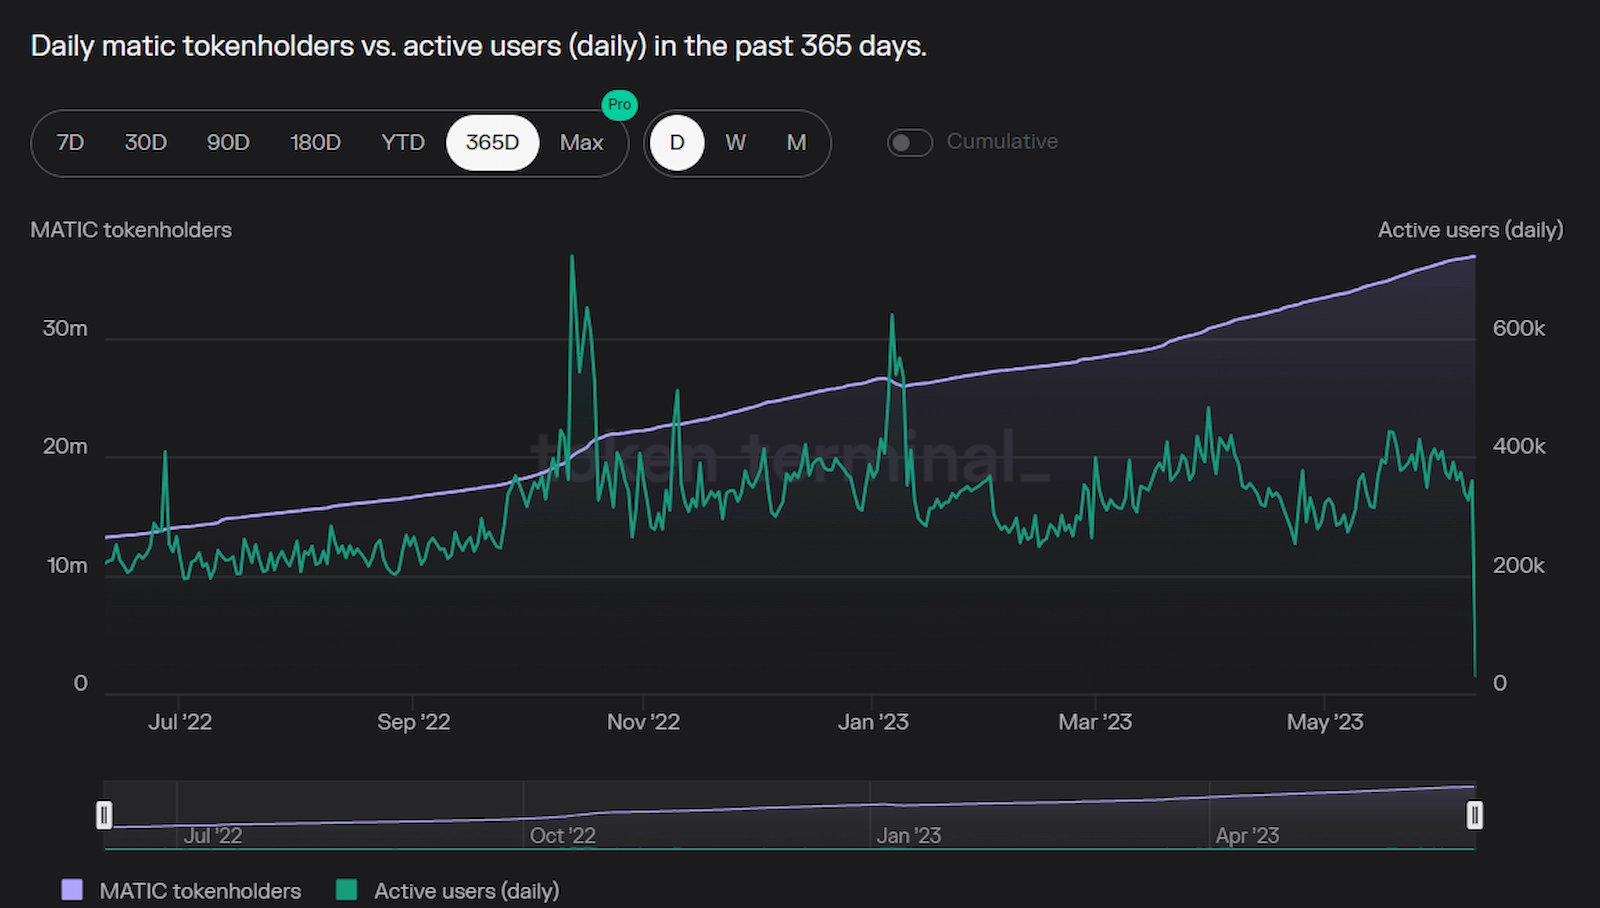 Daily active users on Polygon plummeted on June 10